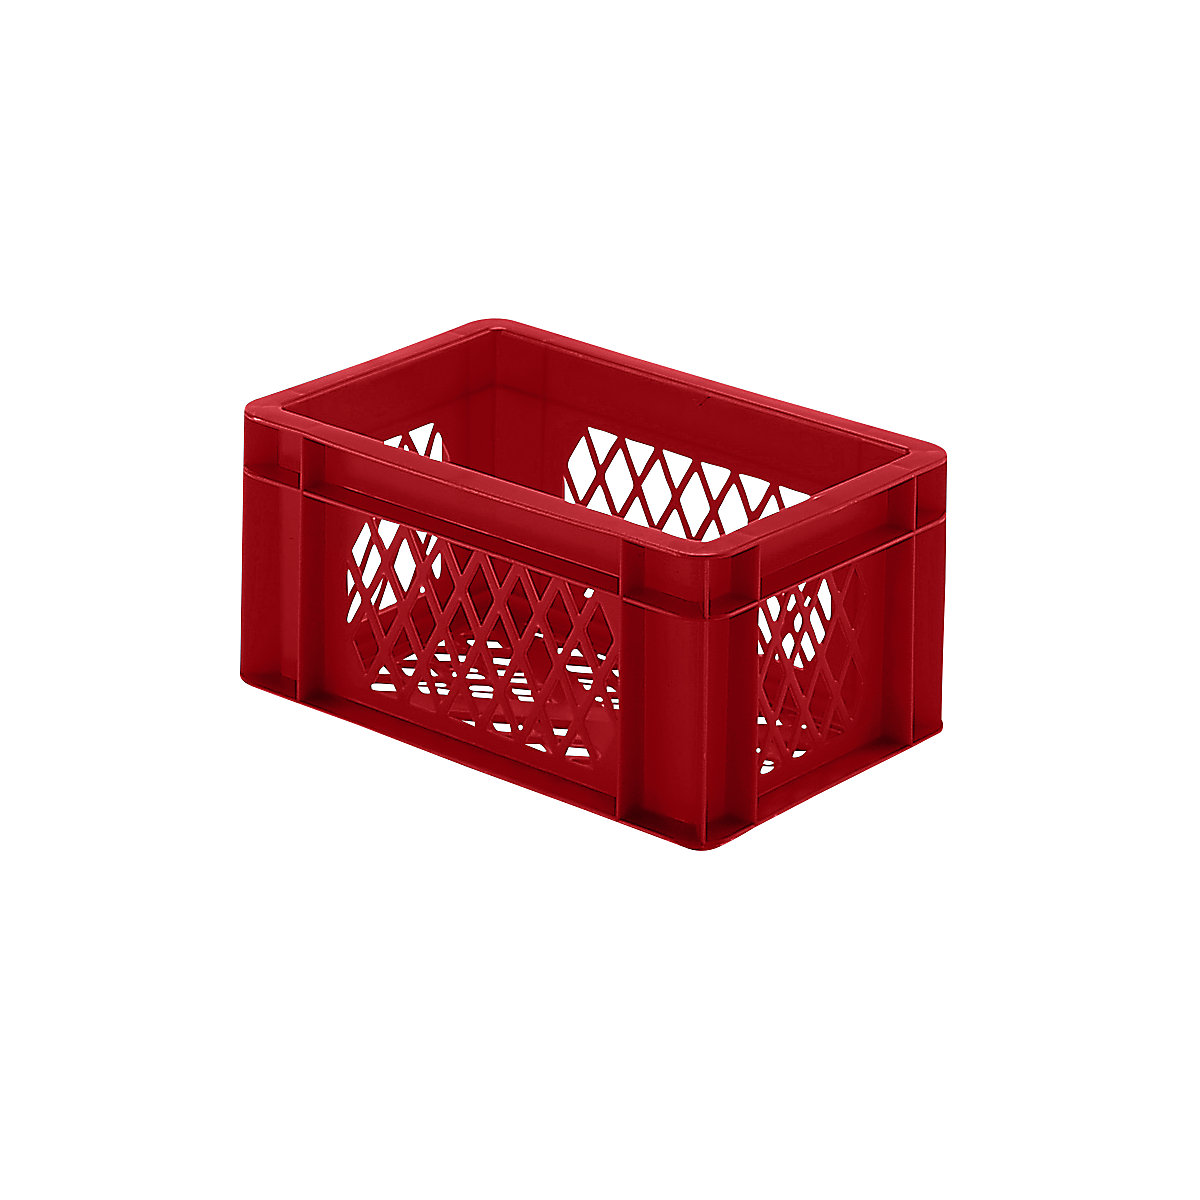 Euro stacking container, perforated walls and base, LxWxH 300 x 200 x 145 mm, red, pack of 5